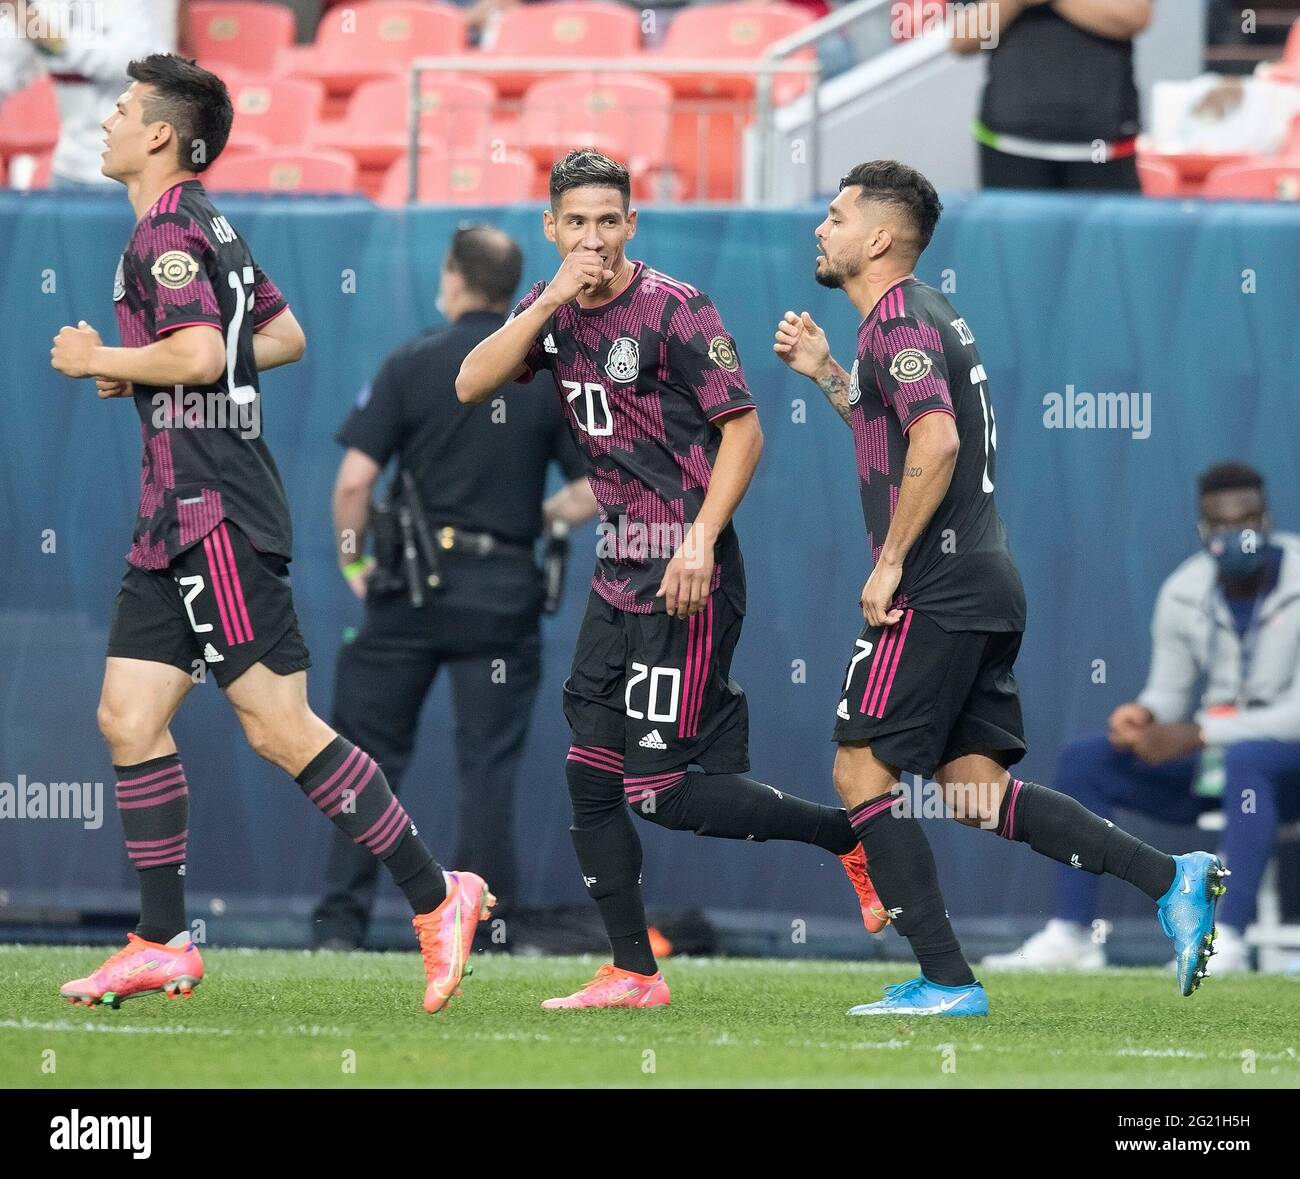 Denver, Colorado, USA. 6th June, 2021. Mexico D HECTOR MORENO, far right, celebrates with team mates after scoring his teams 1st. goal of the night Sunday evening at Empower Field at Mile High. USA beats Mexico 3-2 in Overtime and win the Inaugural Concacaf Nations League Cup. Credit: Hector Acevedo/ZUMA Wire/Alamy Live News Stock Photo